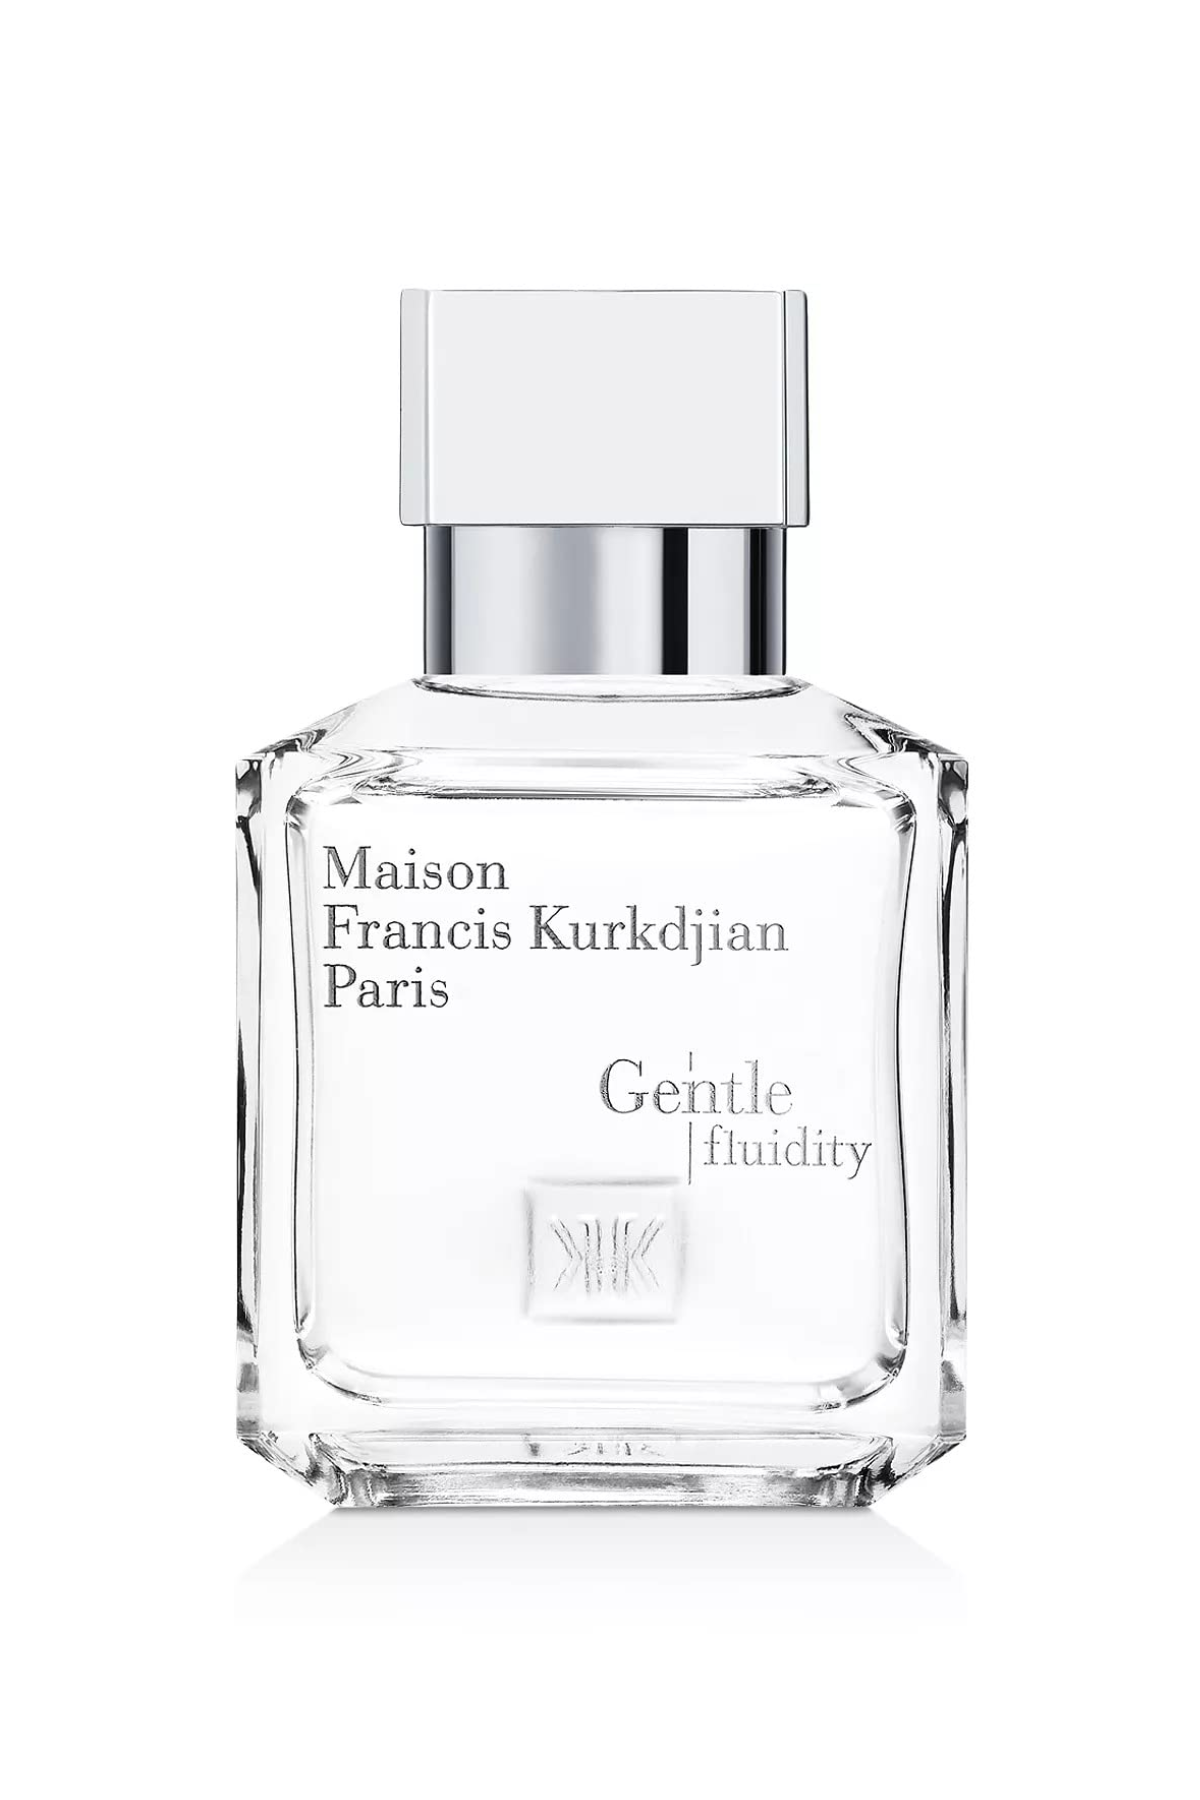 A bottle of MFK Gentle Fluidity Silver perfume against a white background.